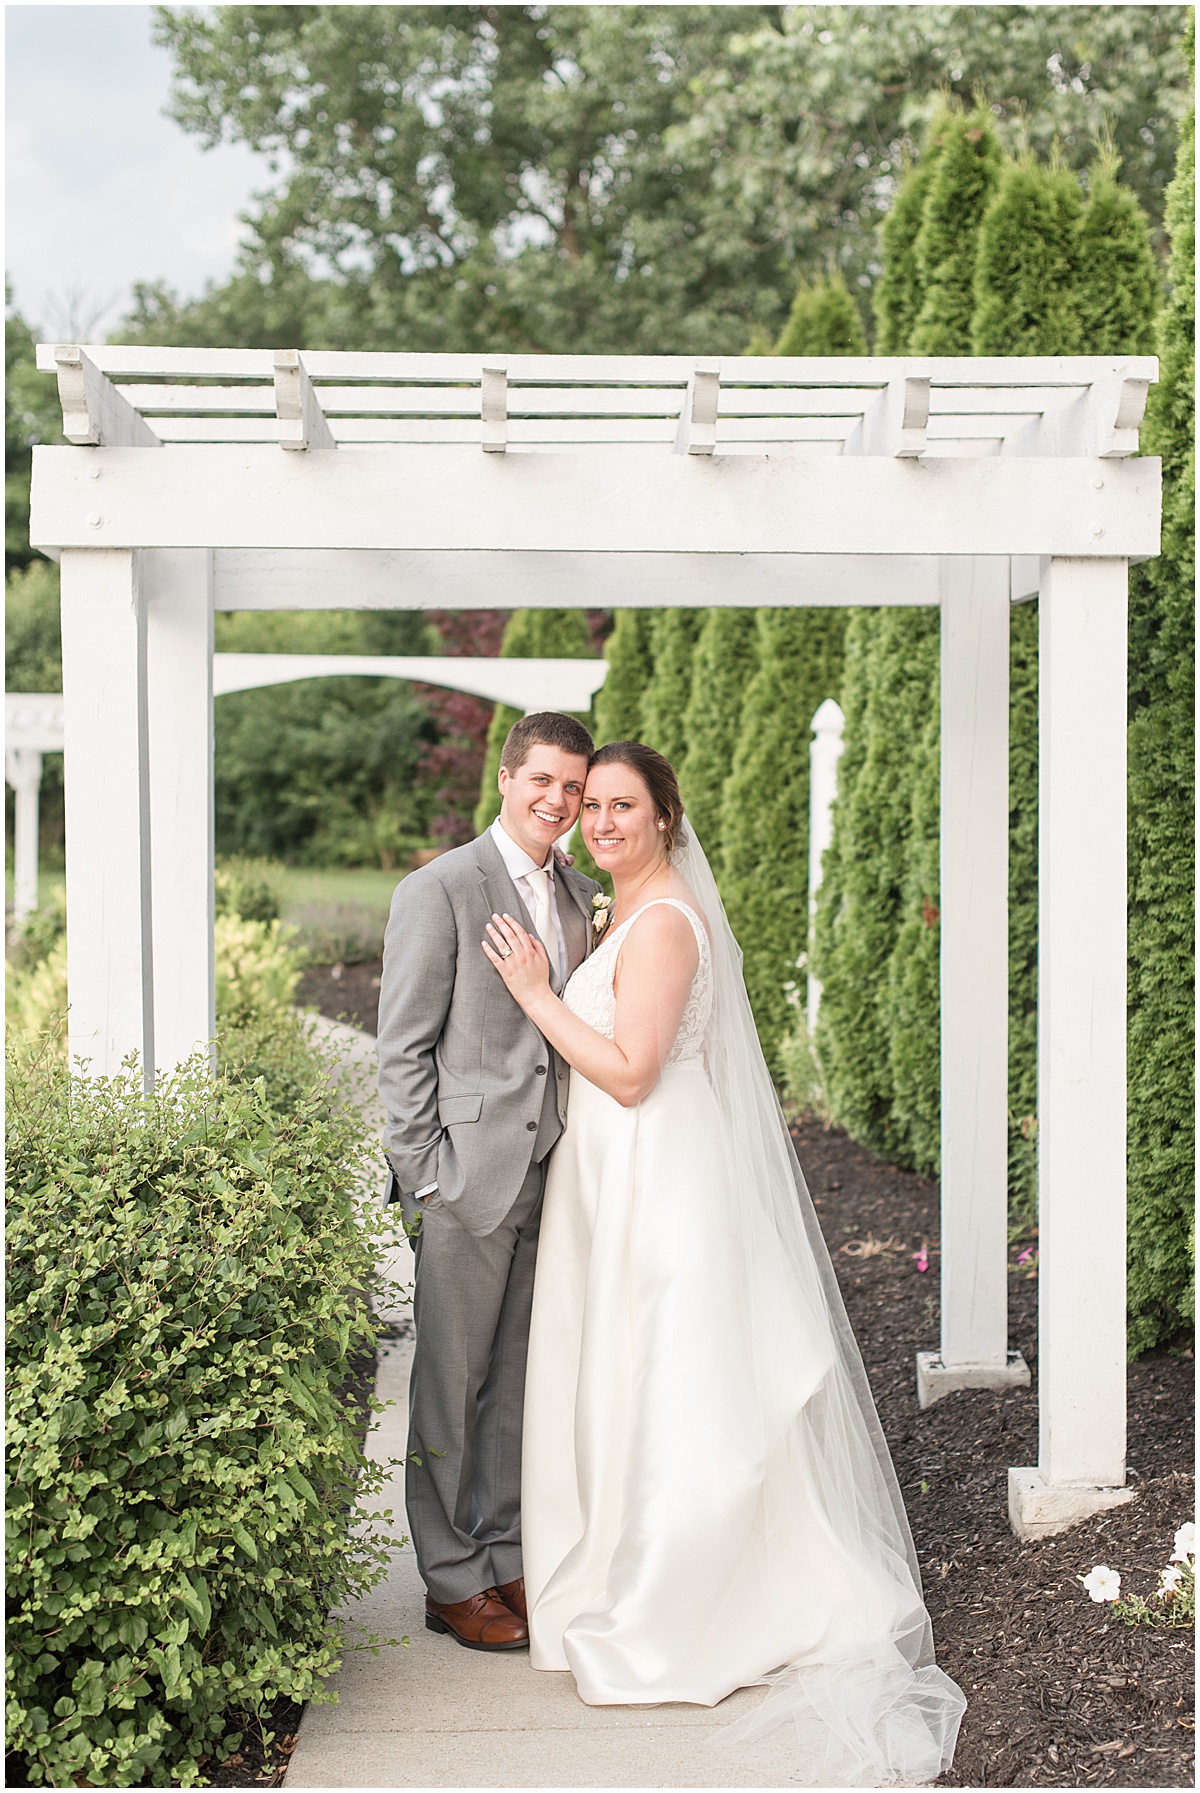 A wedding at The Willows on Westfield in Indianapolis